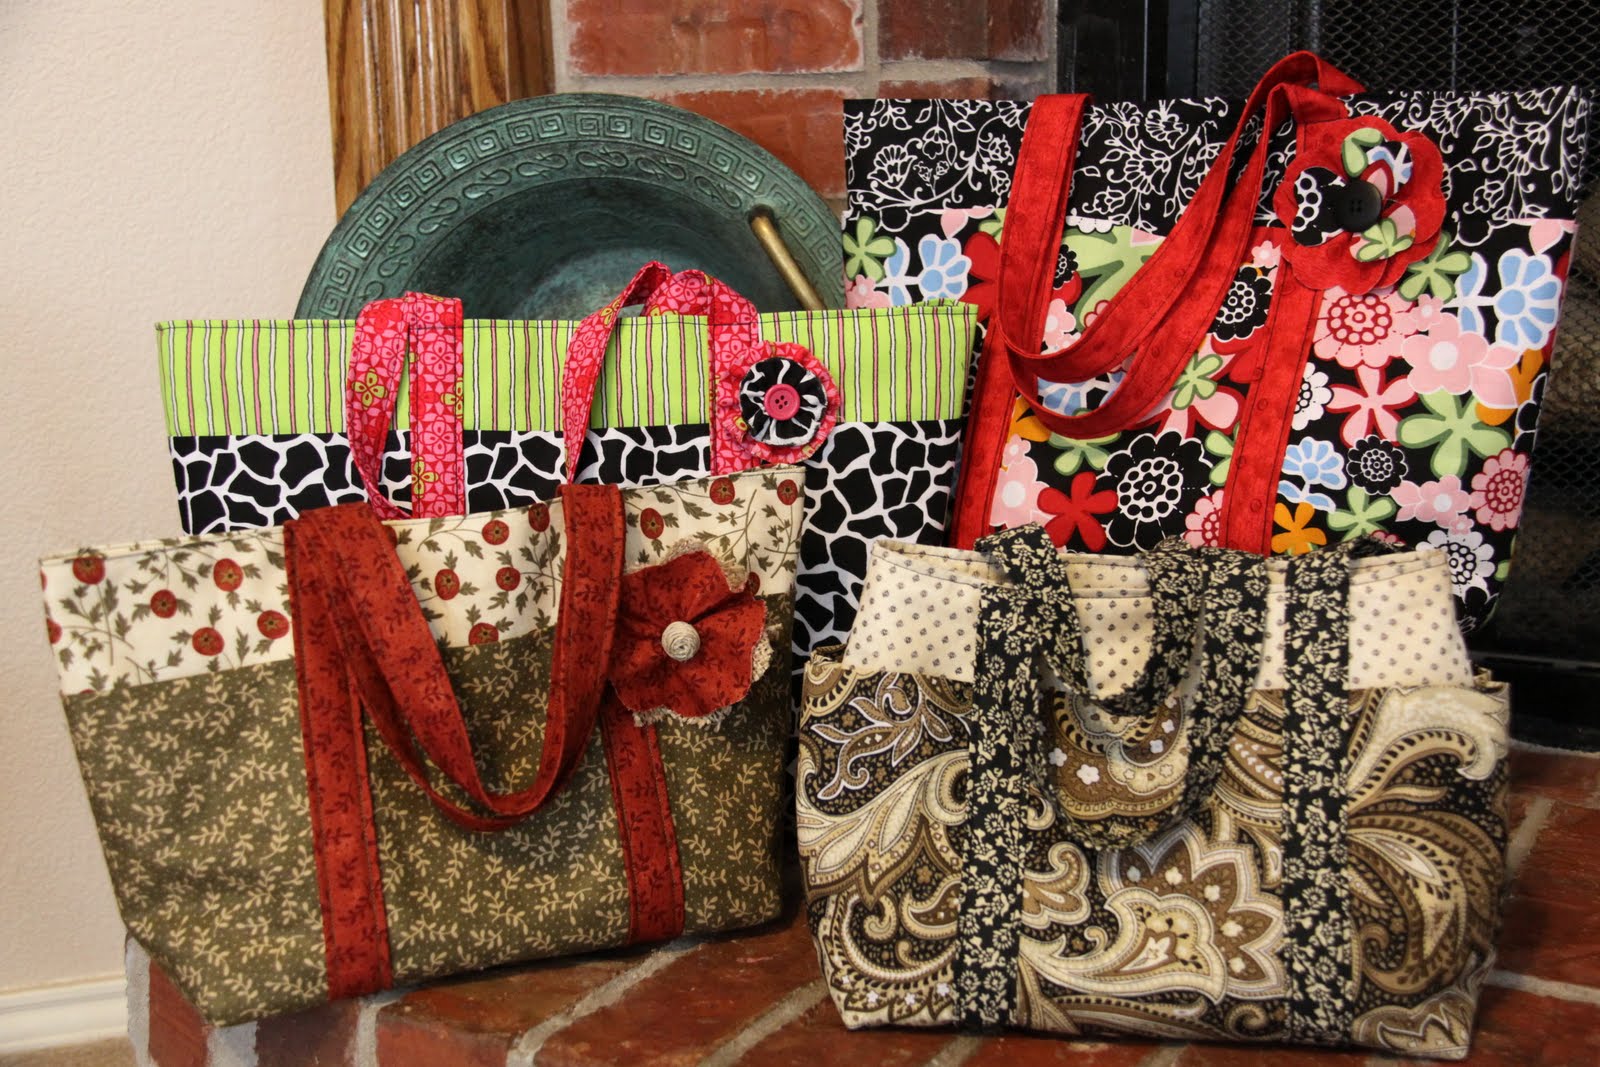 Minutes to Spare...: Fun Fabric Bags